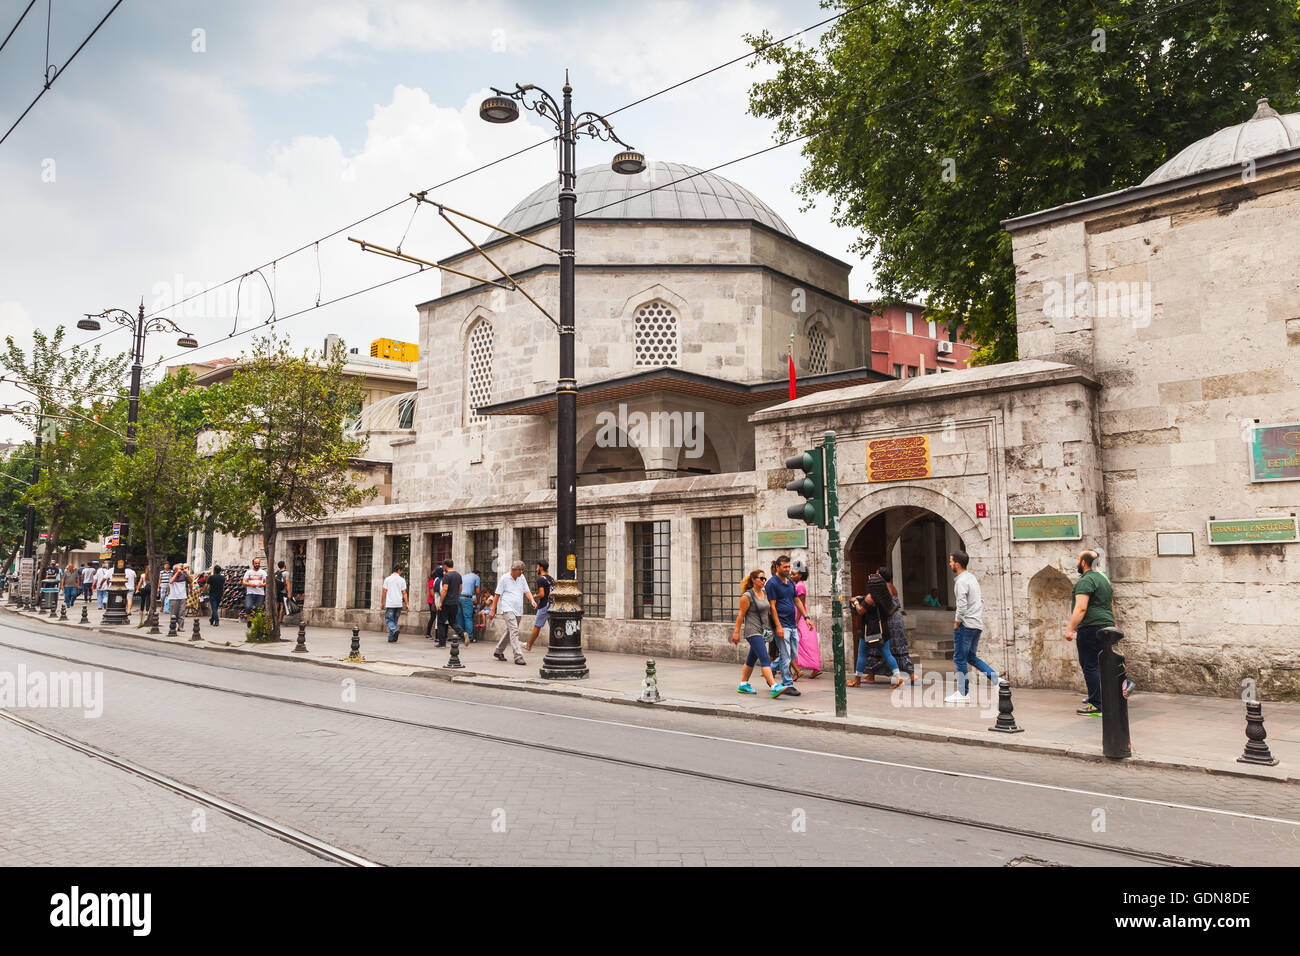 Istanbul, Turkey - June 28, 2016: Ordinary people walk on the street in old central district of Istanbul city near Yahya Kemal M Stock Photo